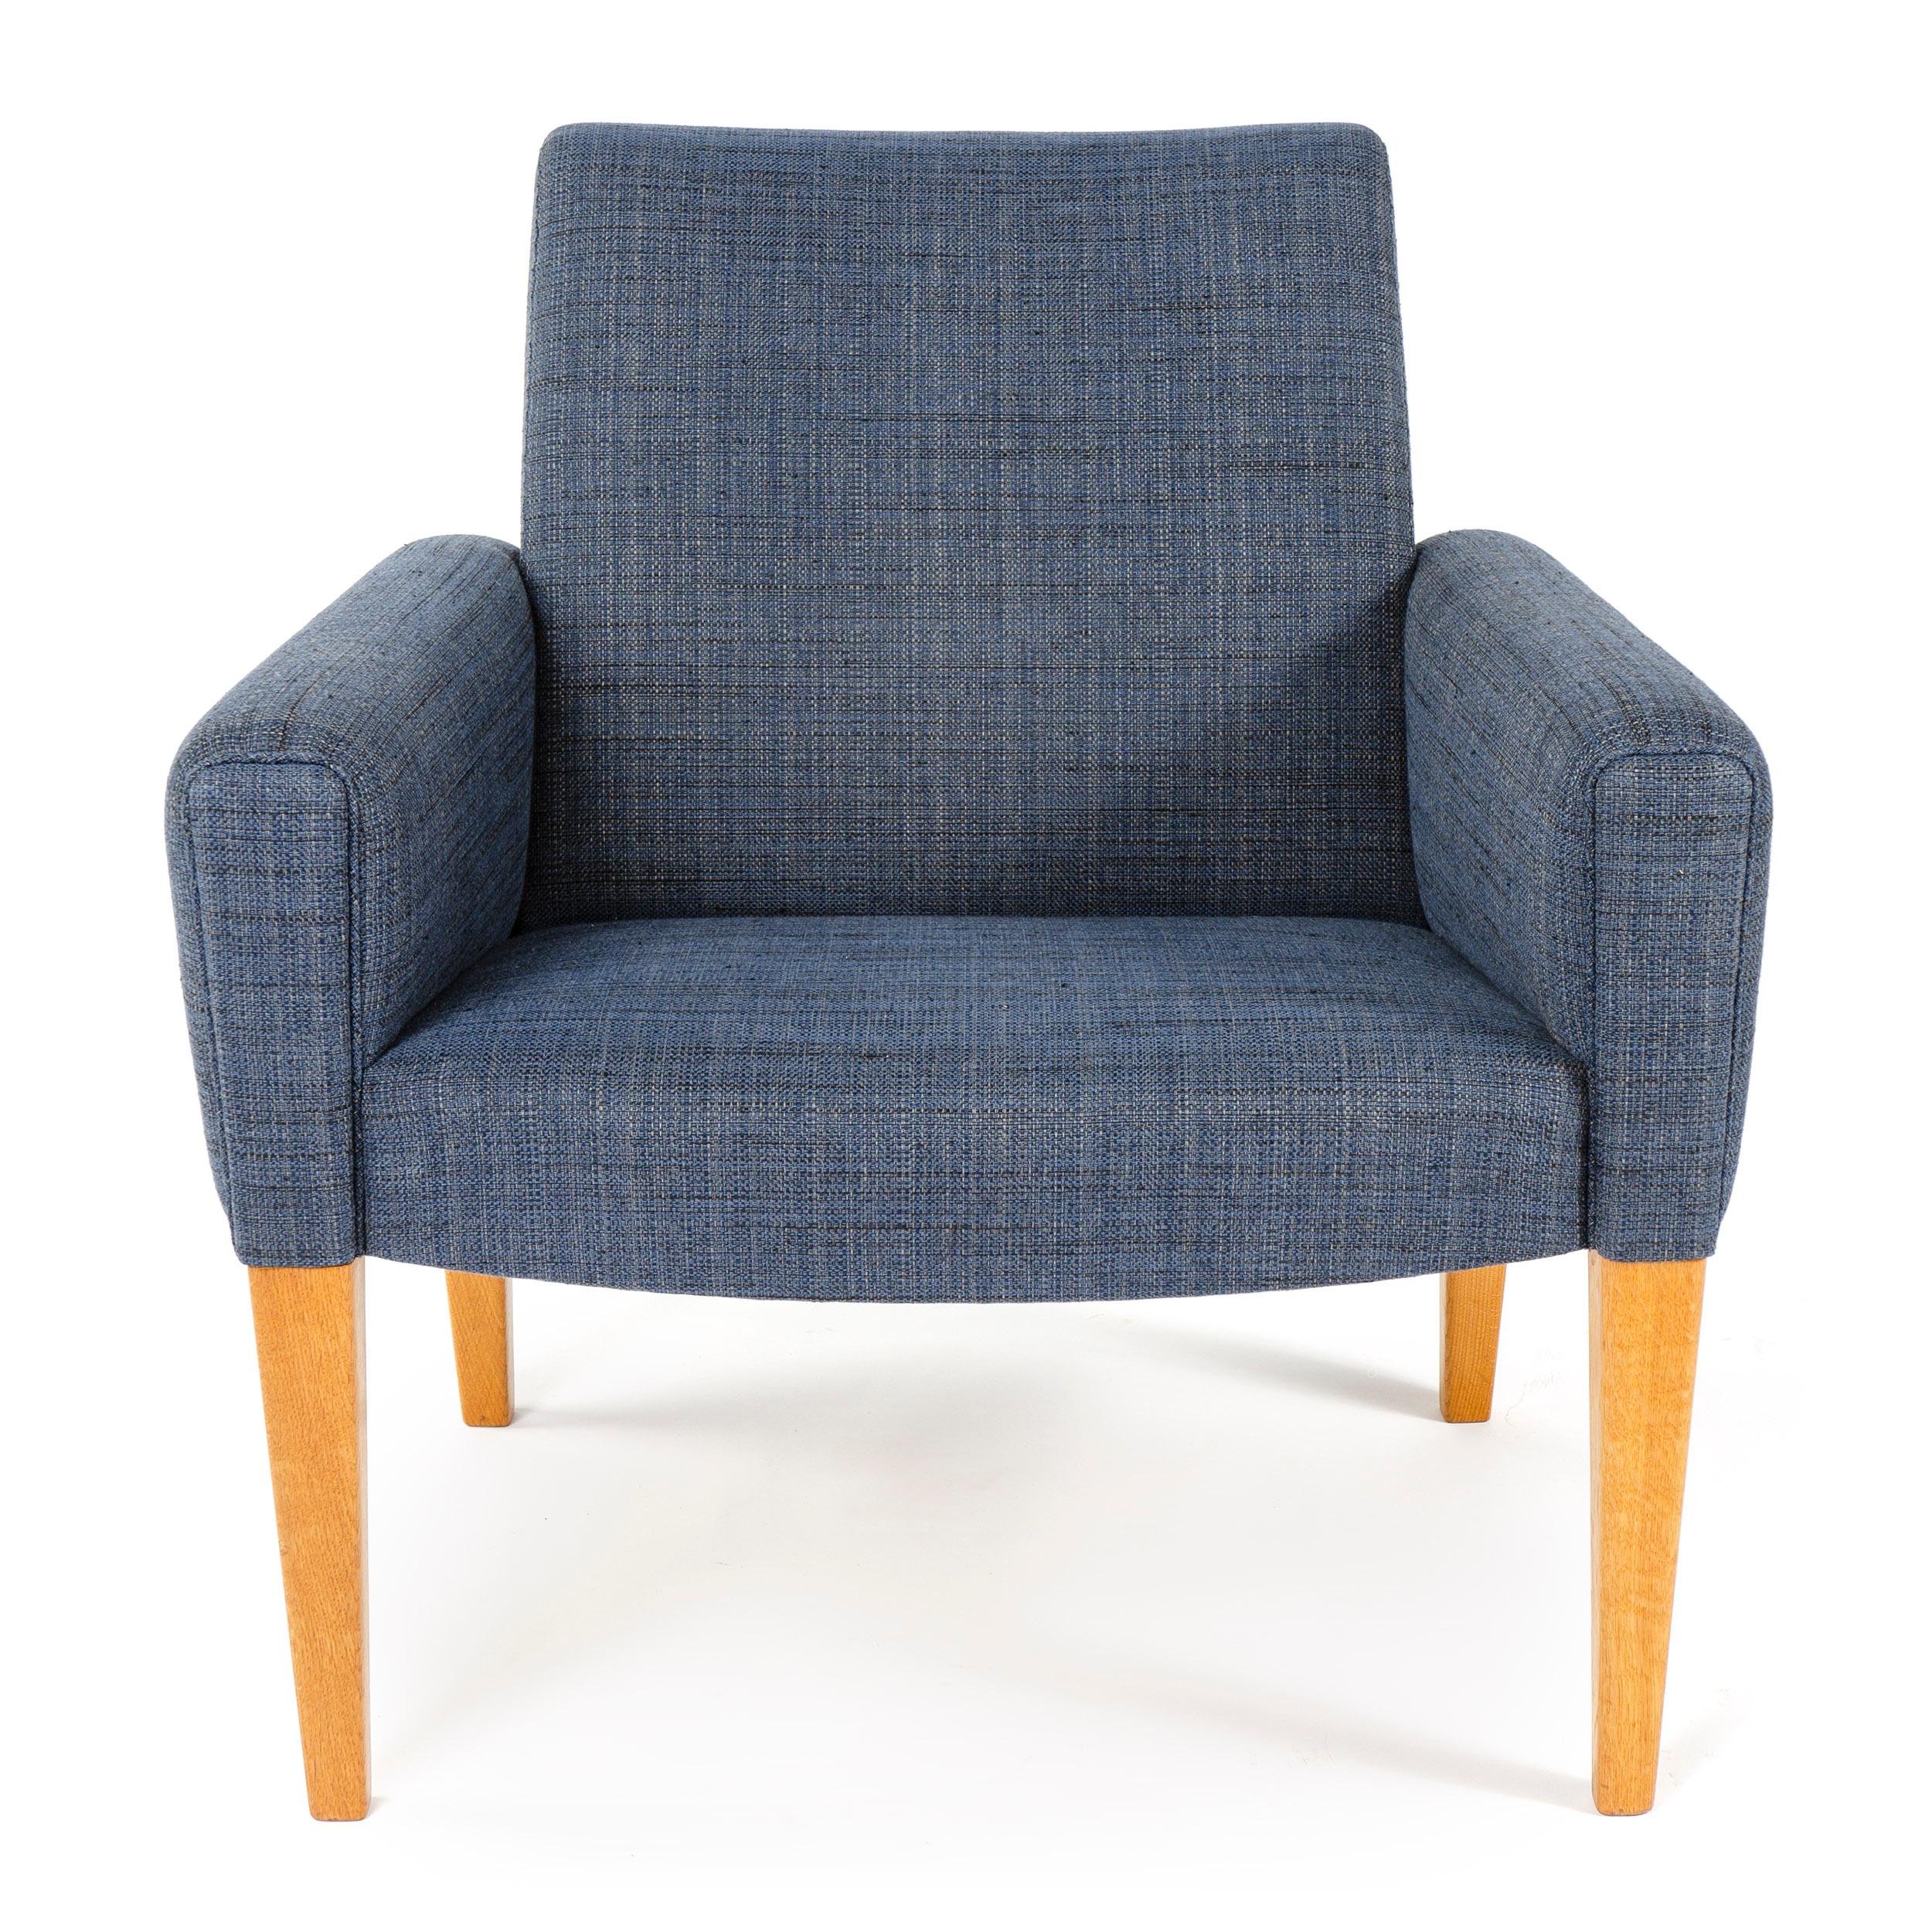 Mid-20th Century 1950s Danish Pair of Armchairs Hans Wegner for A.P. Stolen For Sale